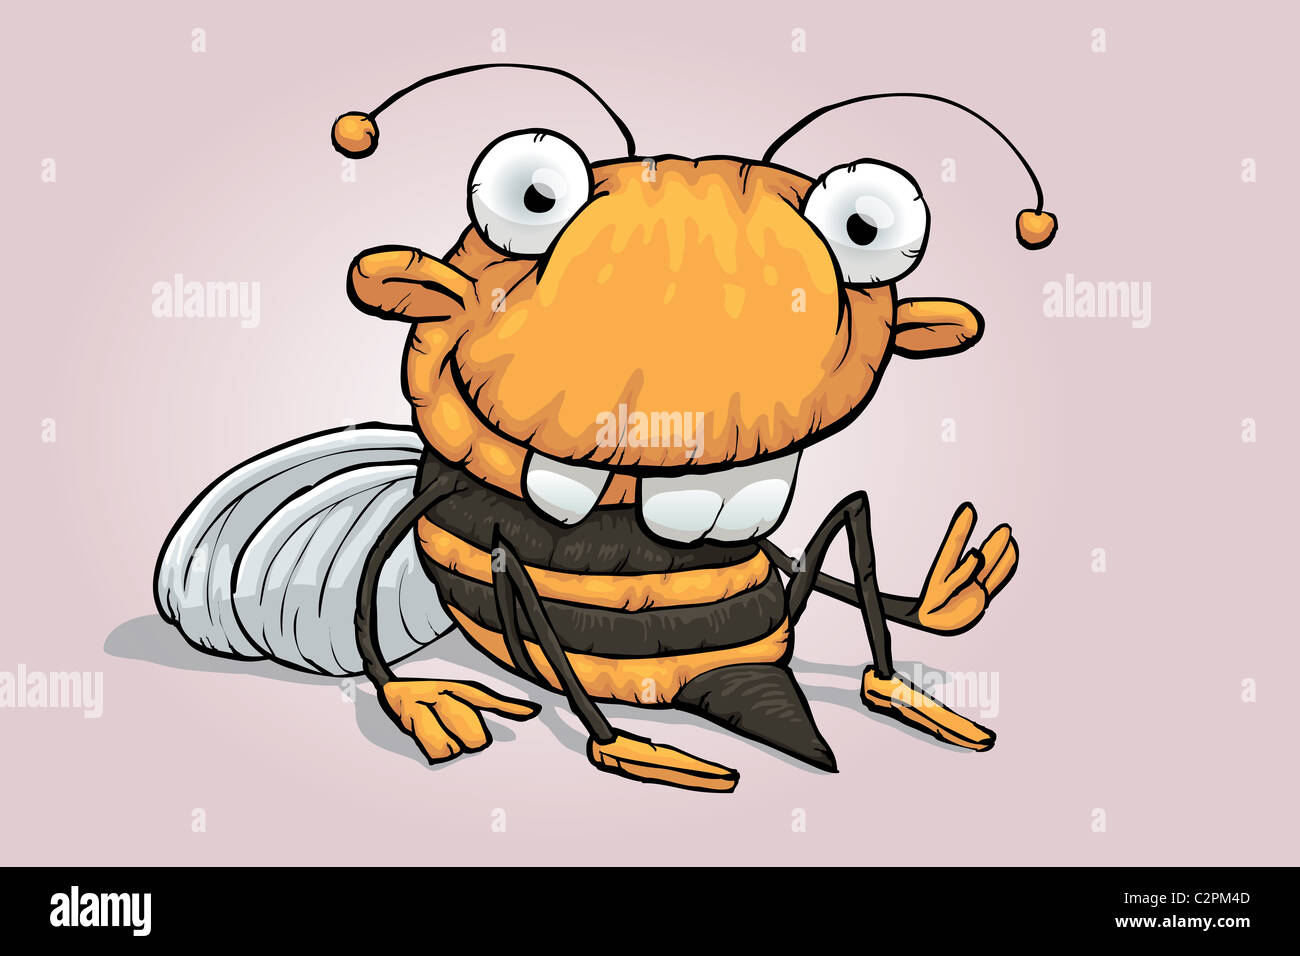 Funny childish bee sitting and waving to you Stock Photo